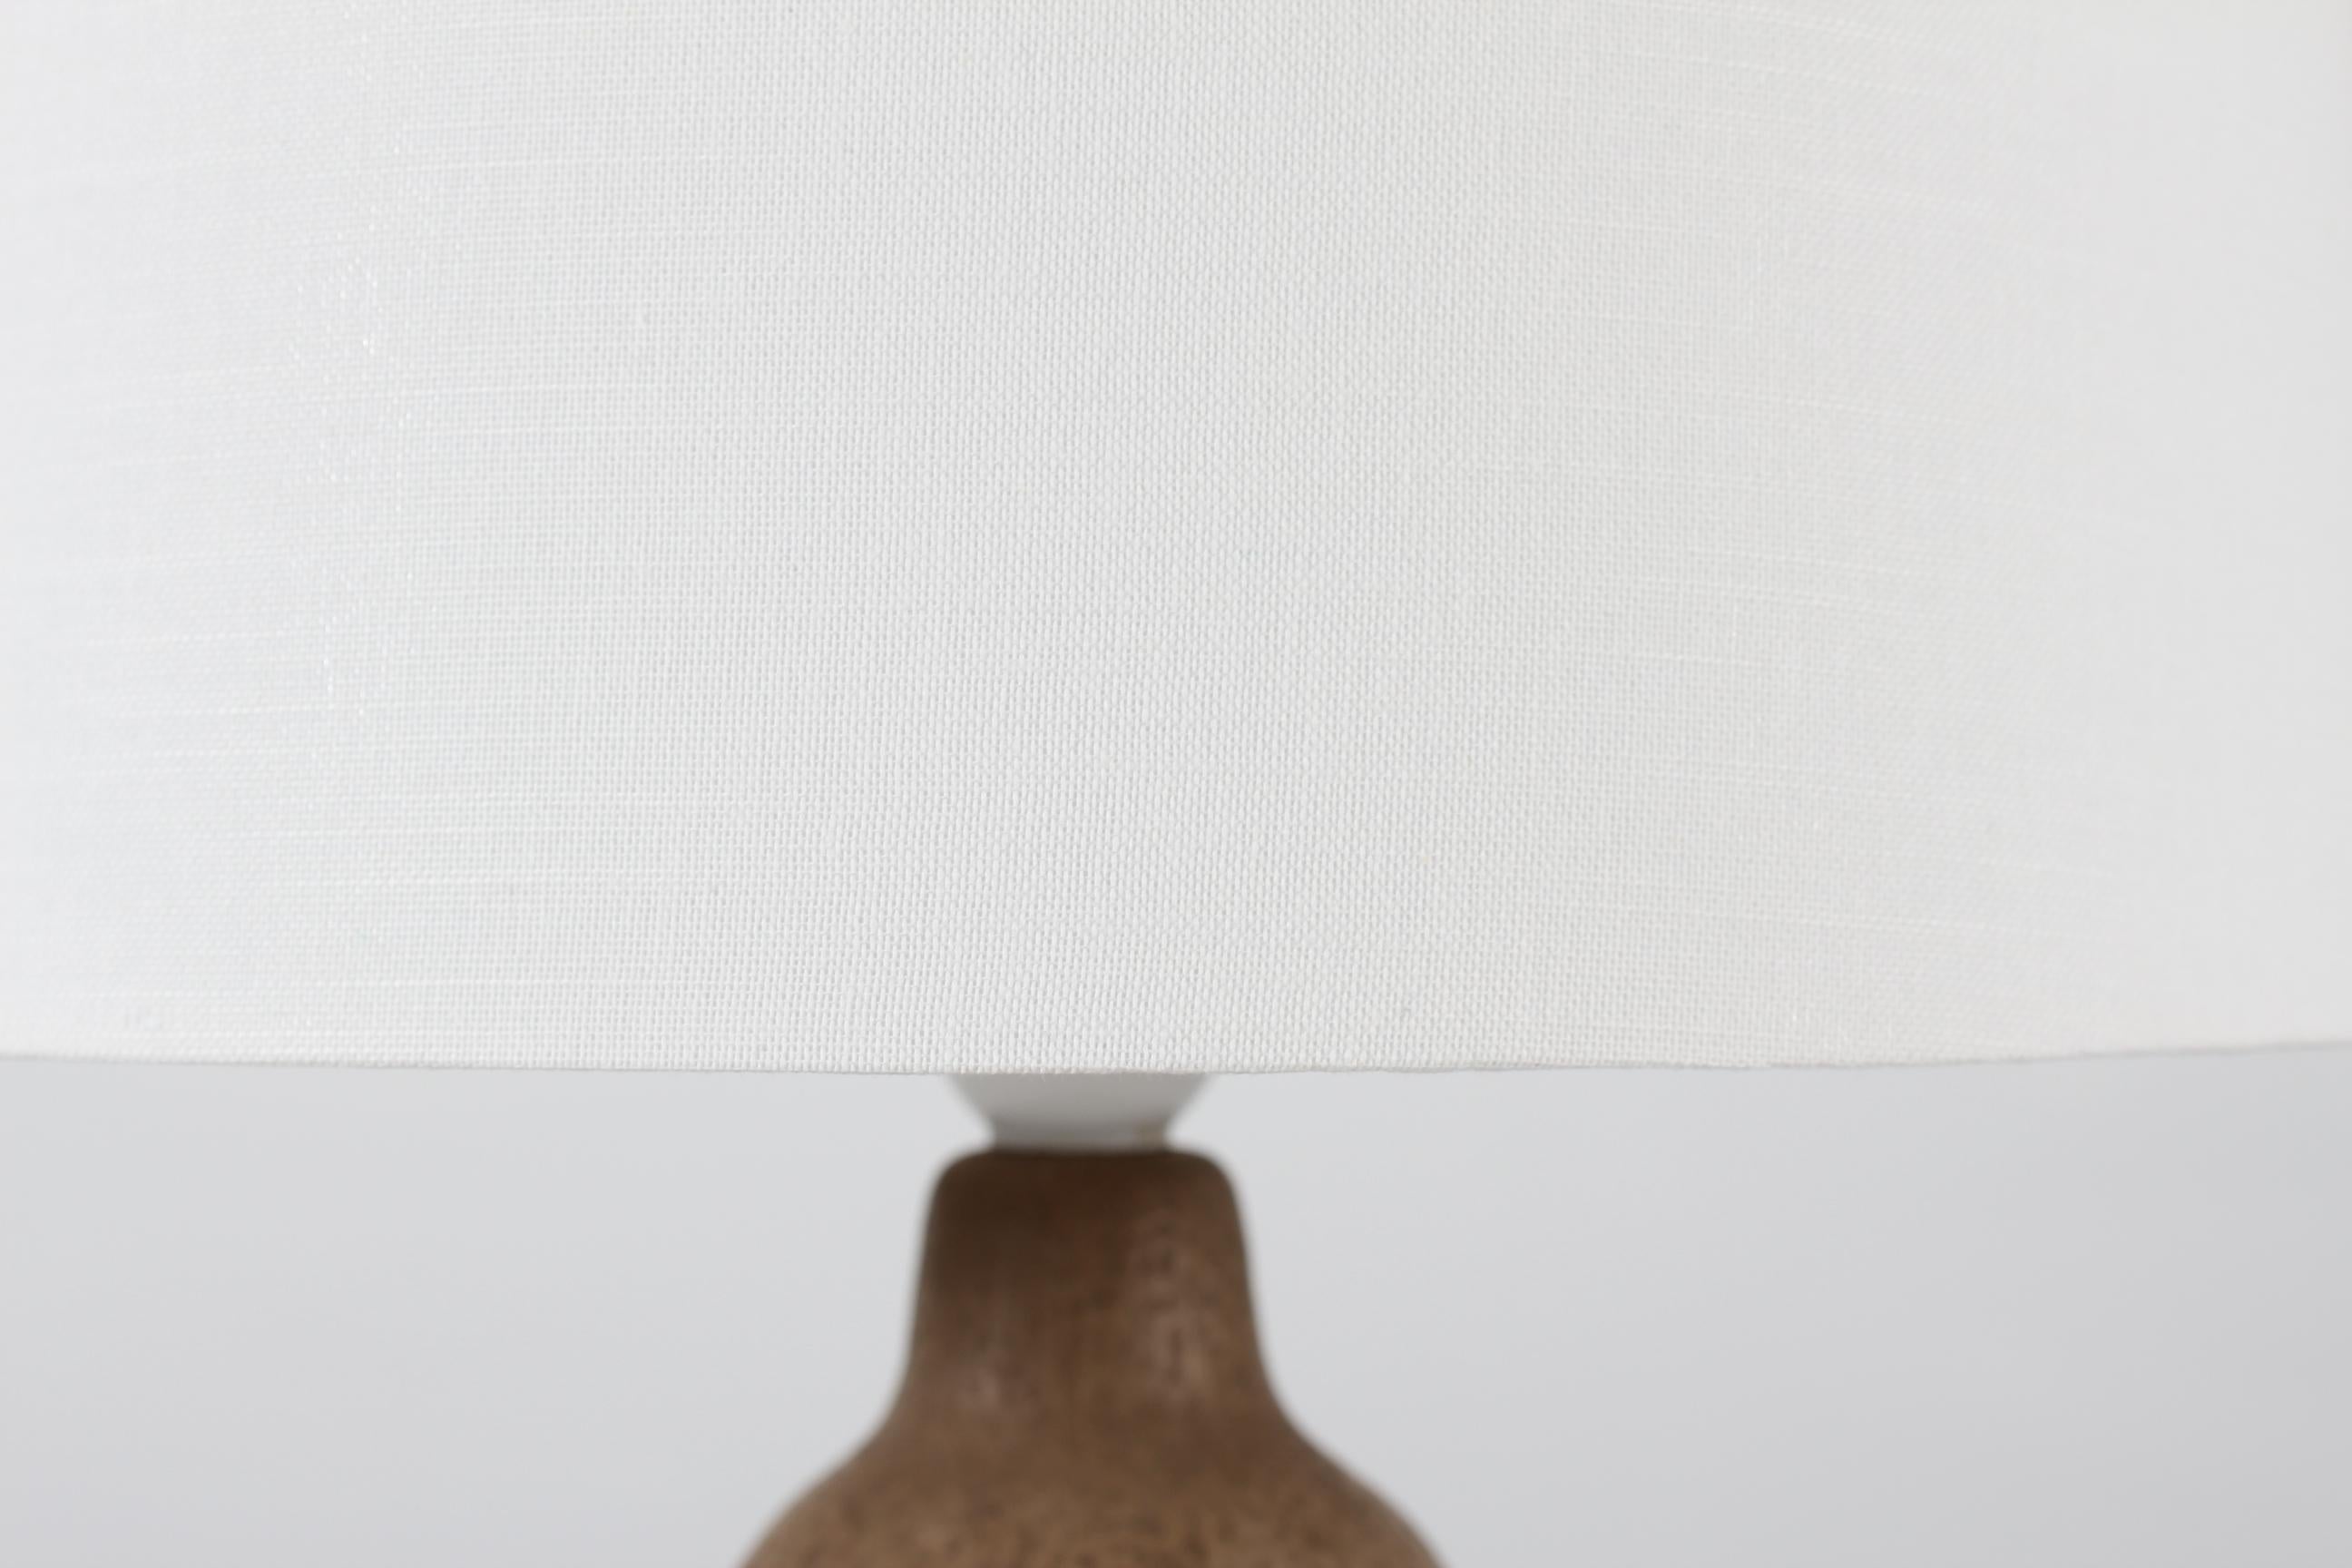 Ceramic table lamp by Einar Johansen made at his own ceramic studio in Denmark circa 1960´s
The unglazed light brown lamp foot has an embossed pattern of small leaves.

Included is a new lamp shade designed and made in Denmark.
It's made of woven